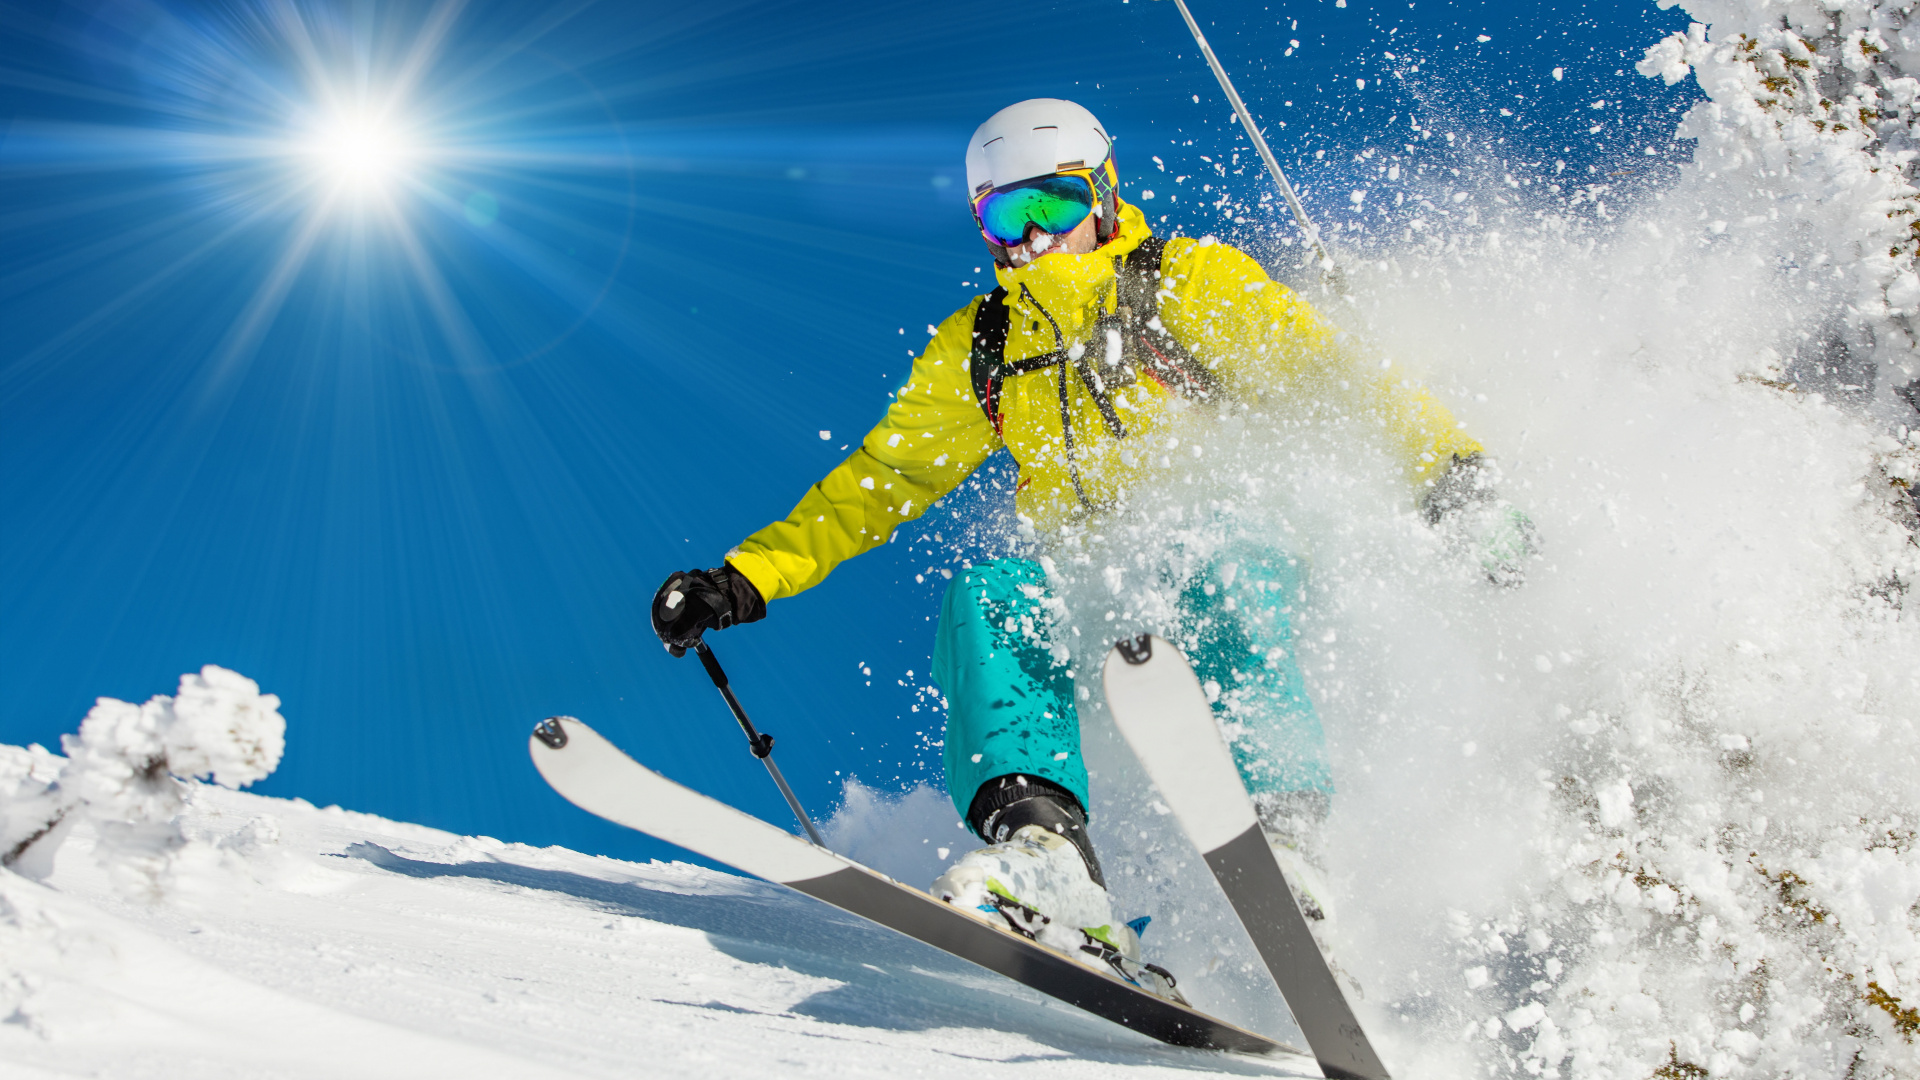 Person in Yellow Jacket and Red Helmet Riding on White and Red Snowboard During Daytime. Wallpaper in 1920x1080 Resolution